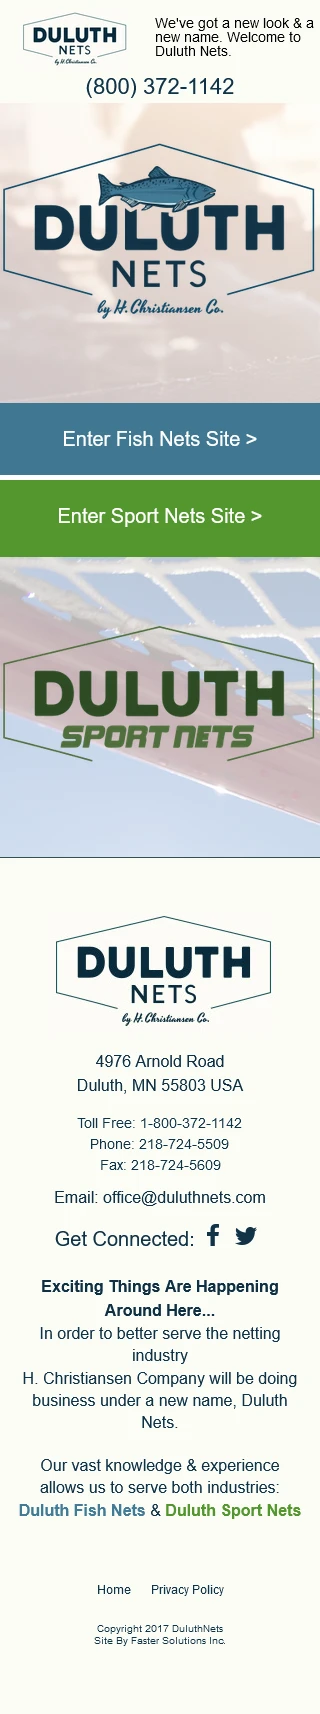 Duluth Fish Nets - Mobile